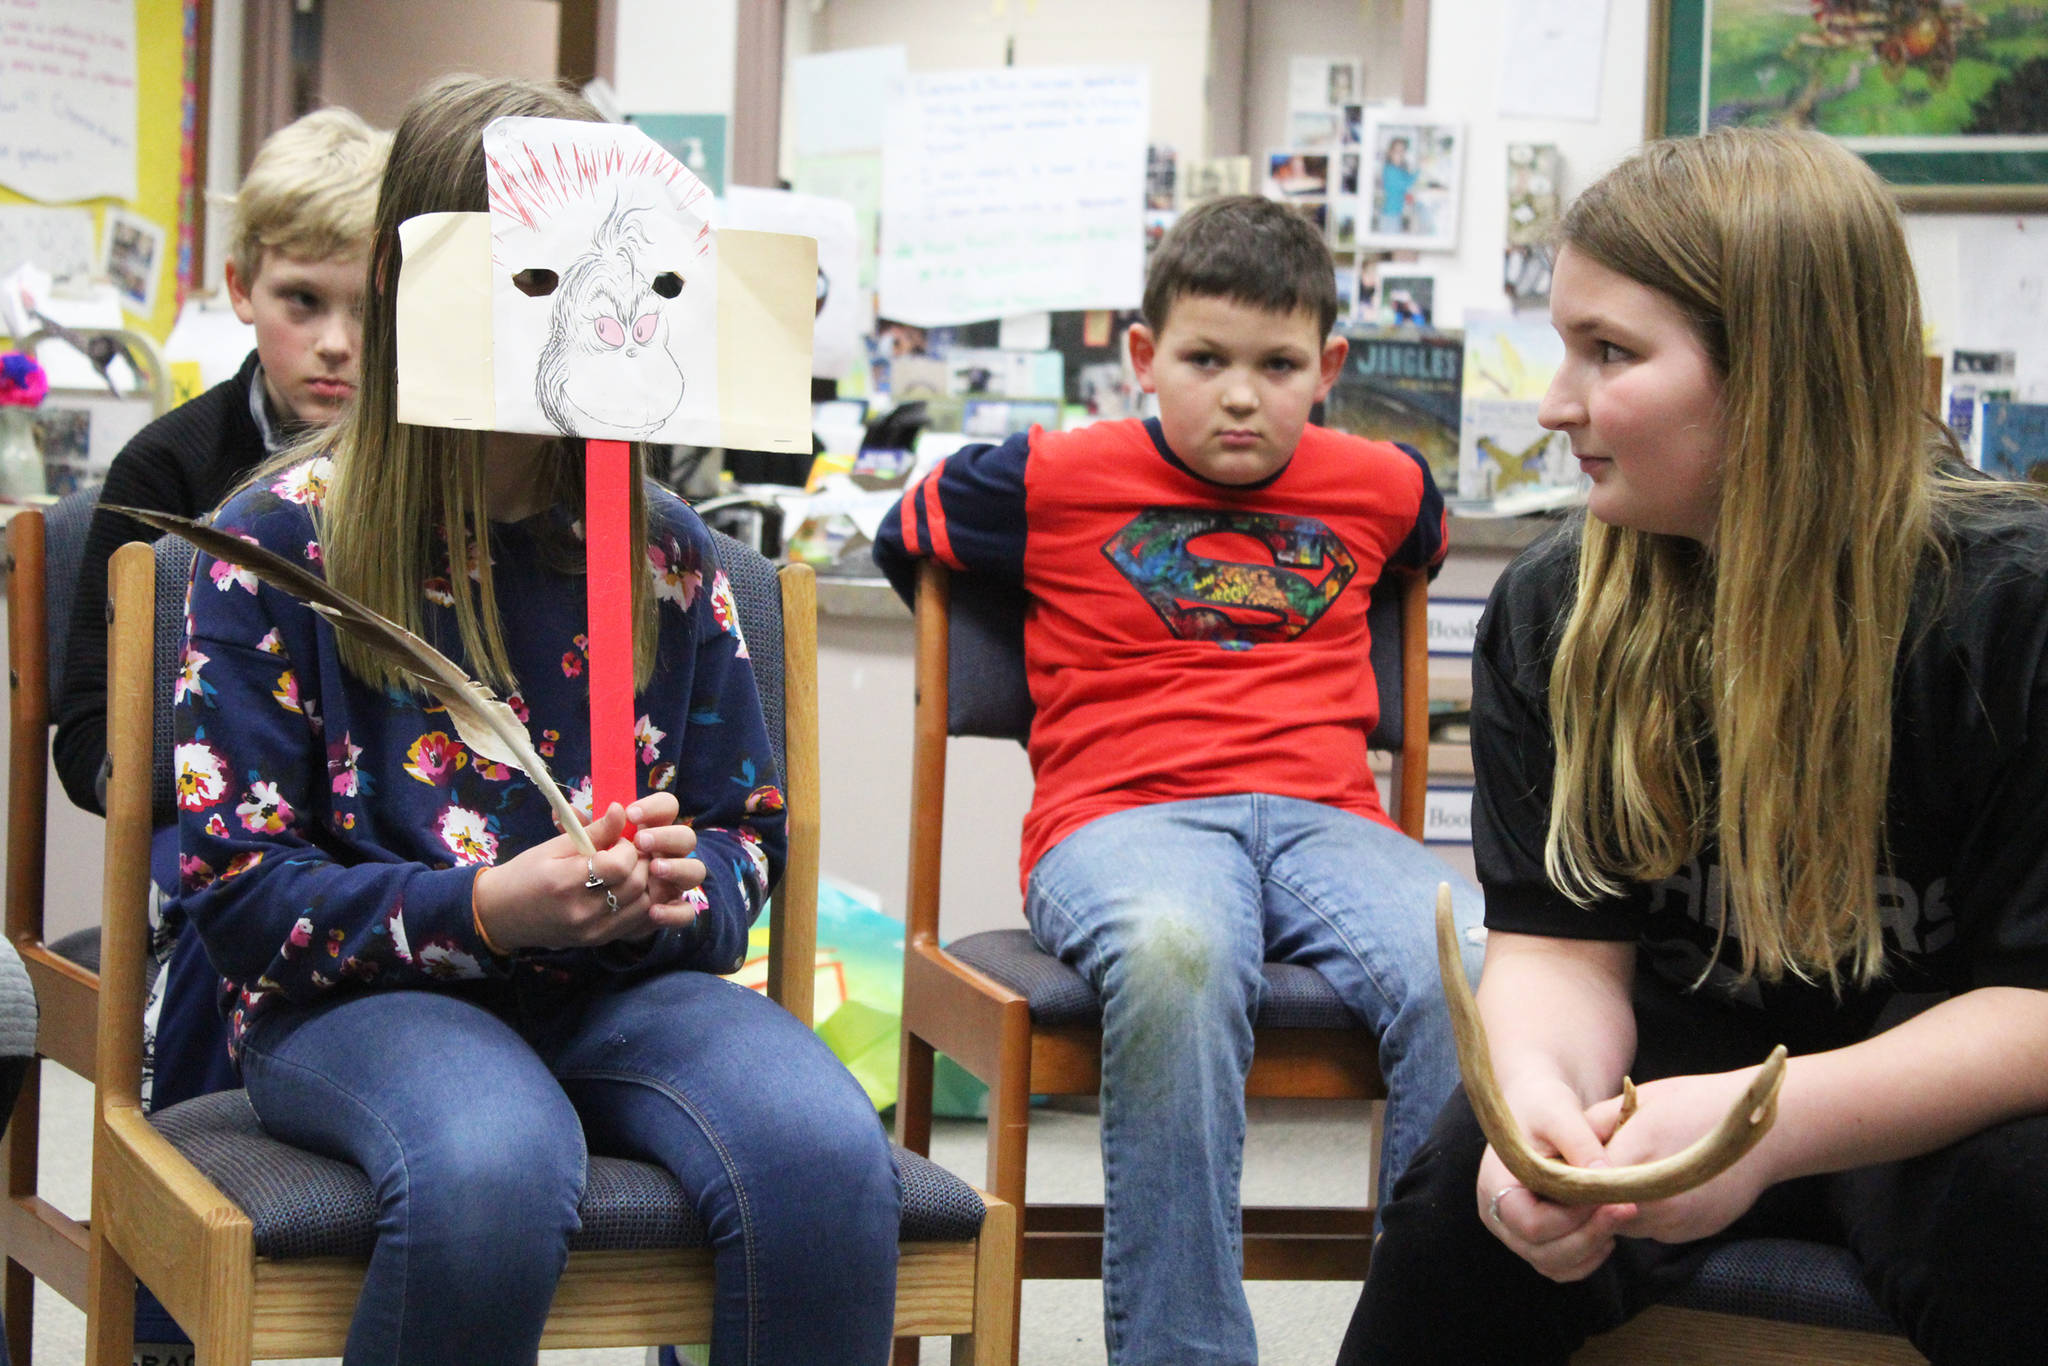 Synnove Neese, left, and Kaiah Stineff, right, act out a restorative justice scenario involving the characters from The Grinch on March 22, 2019 at West Homer Elementary School in Homer, Alaska. Fifth and sixth graders at the school are partaking in a new restorative justice program through the already existing Youth Court program. (Photo by Megan Pacer/Homer News)